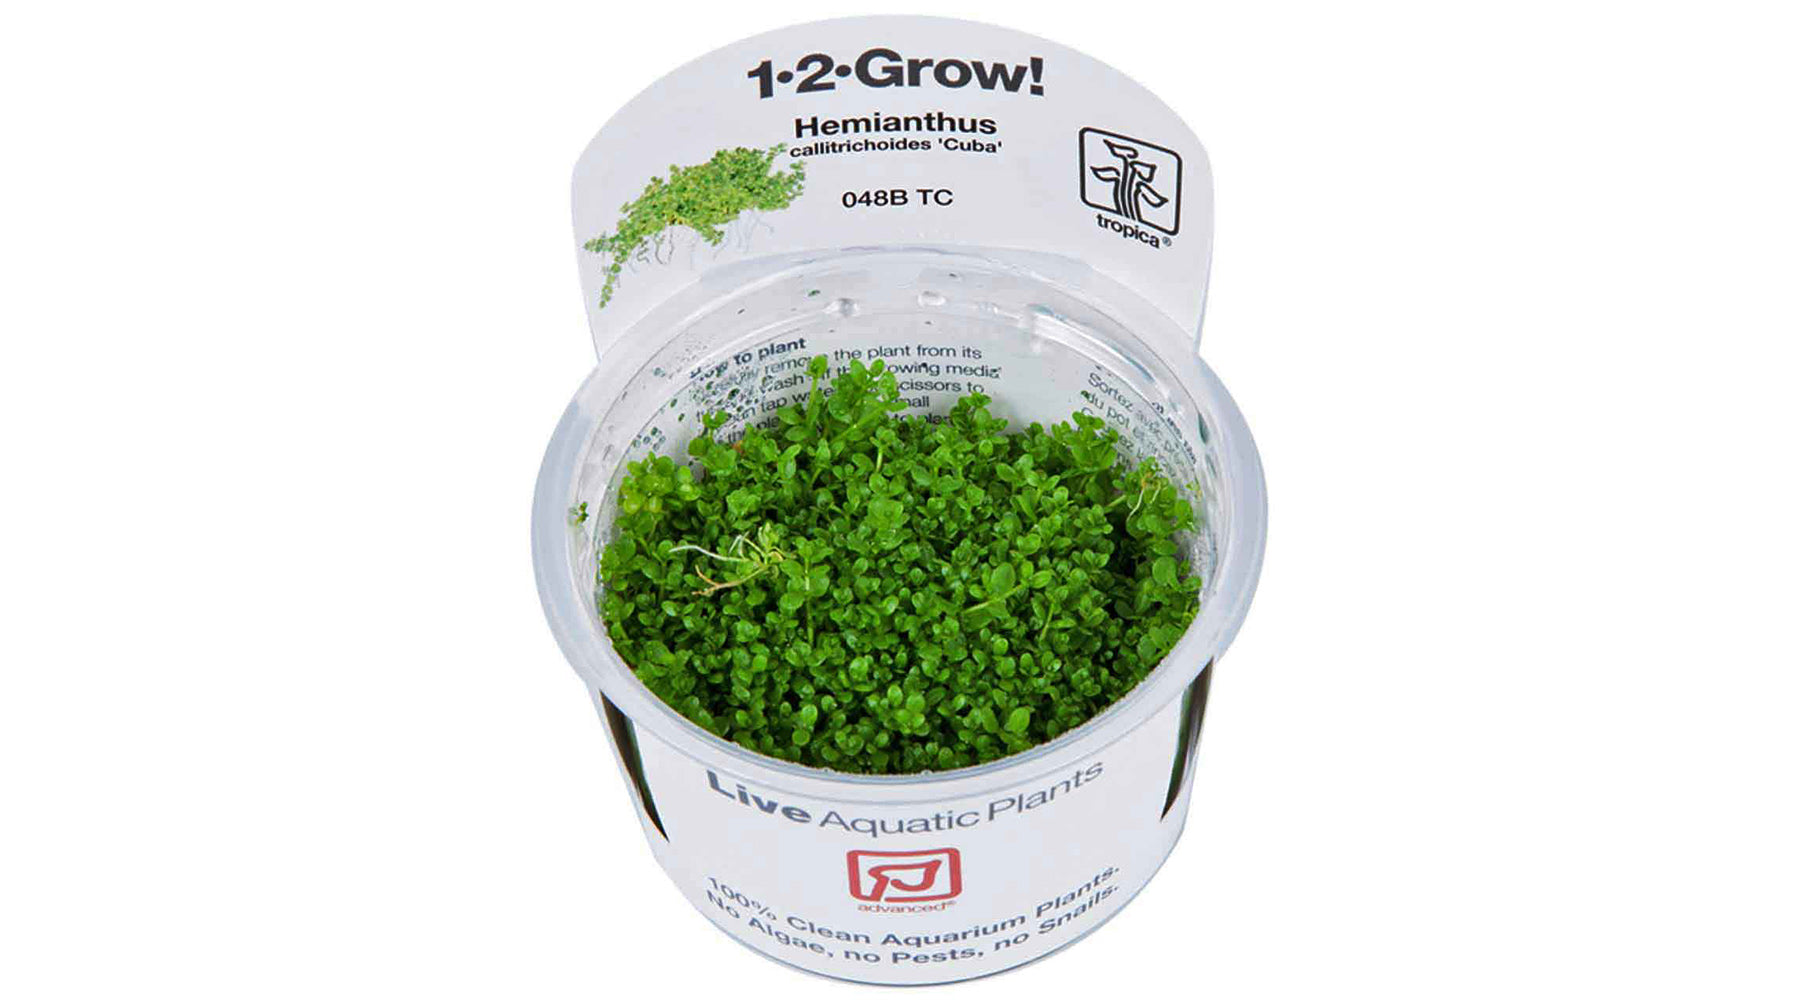 Guide to buying/planting aquatic plant tissue cultures